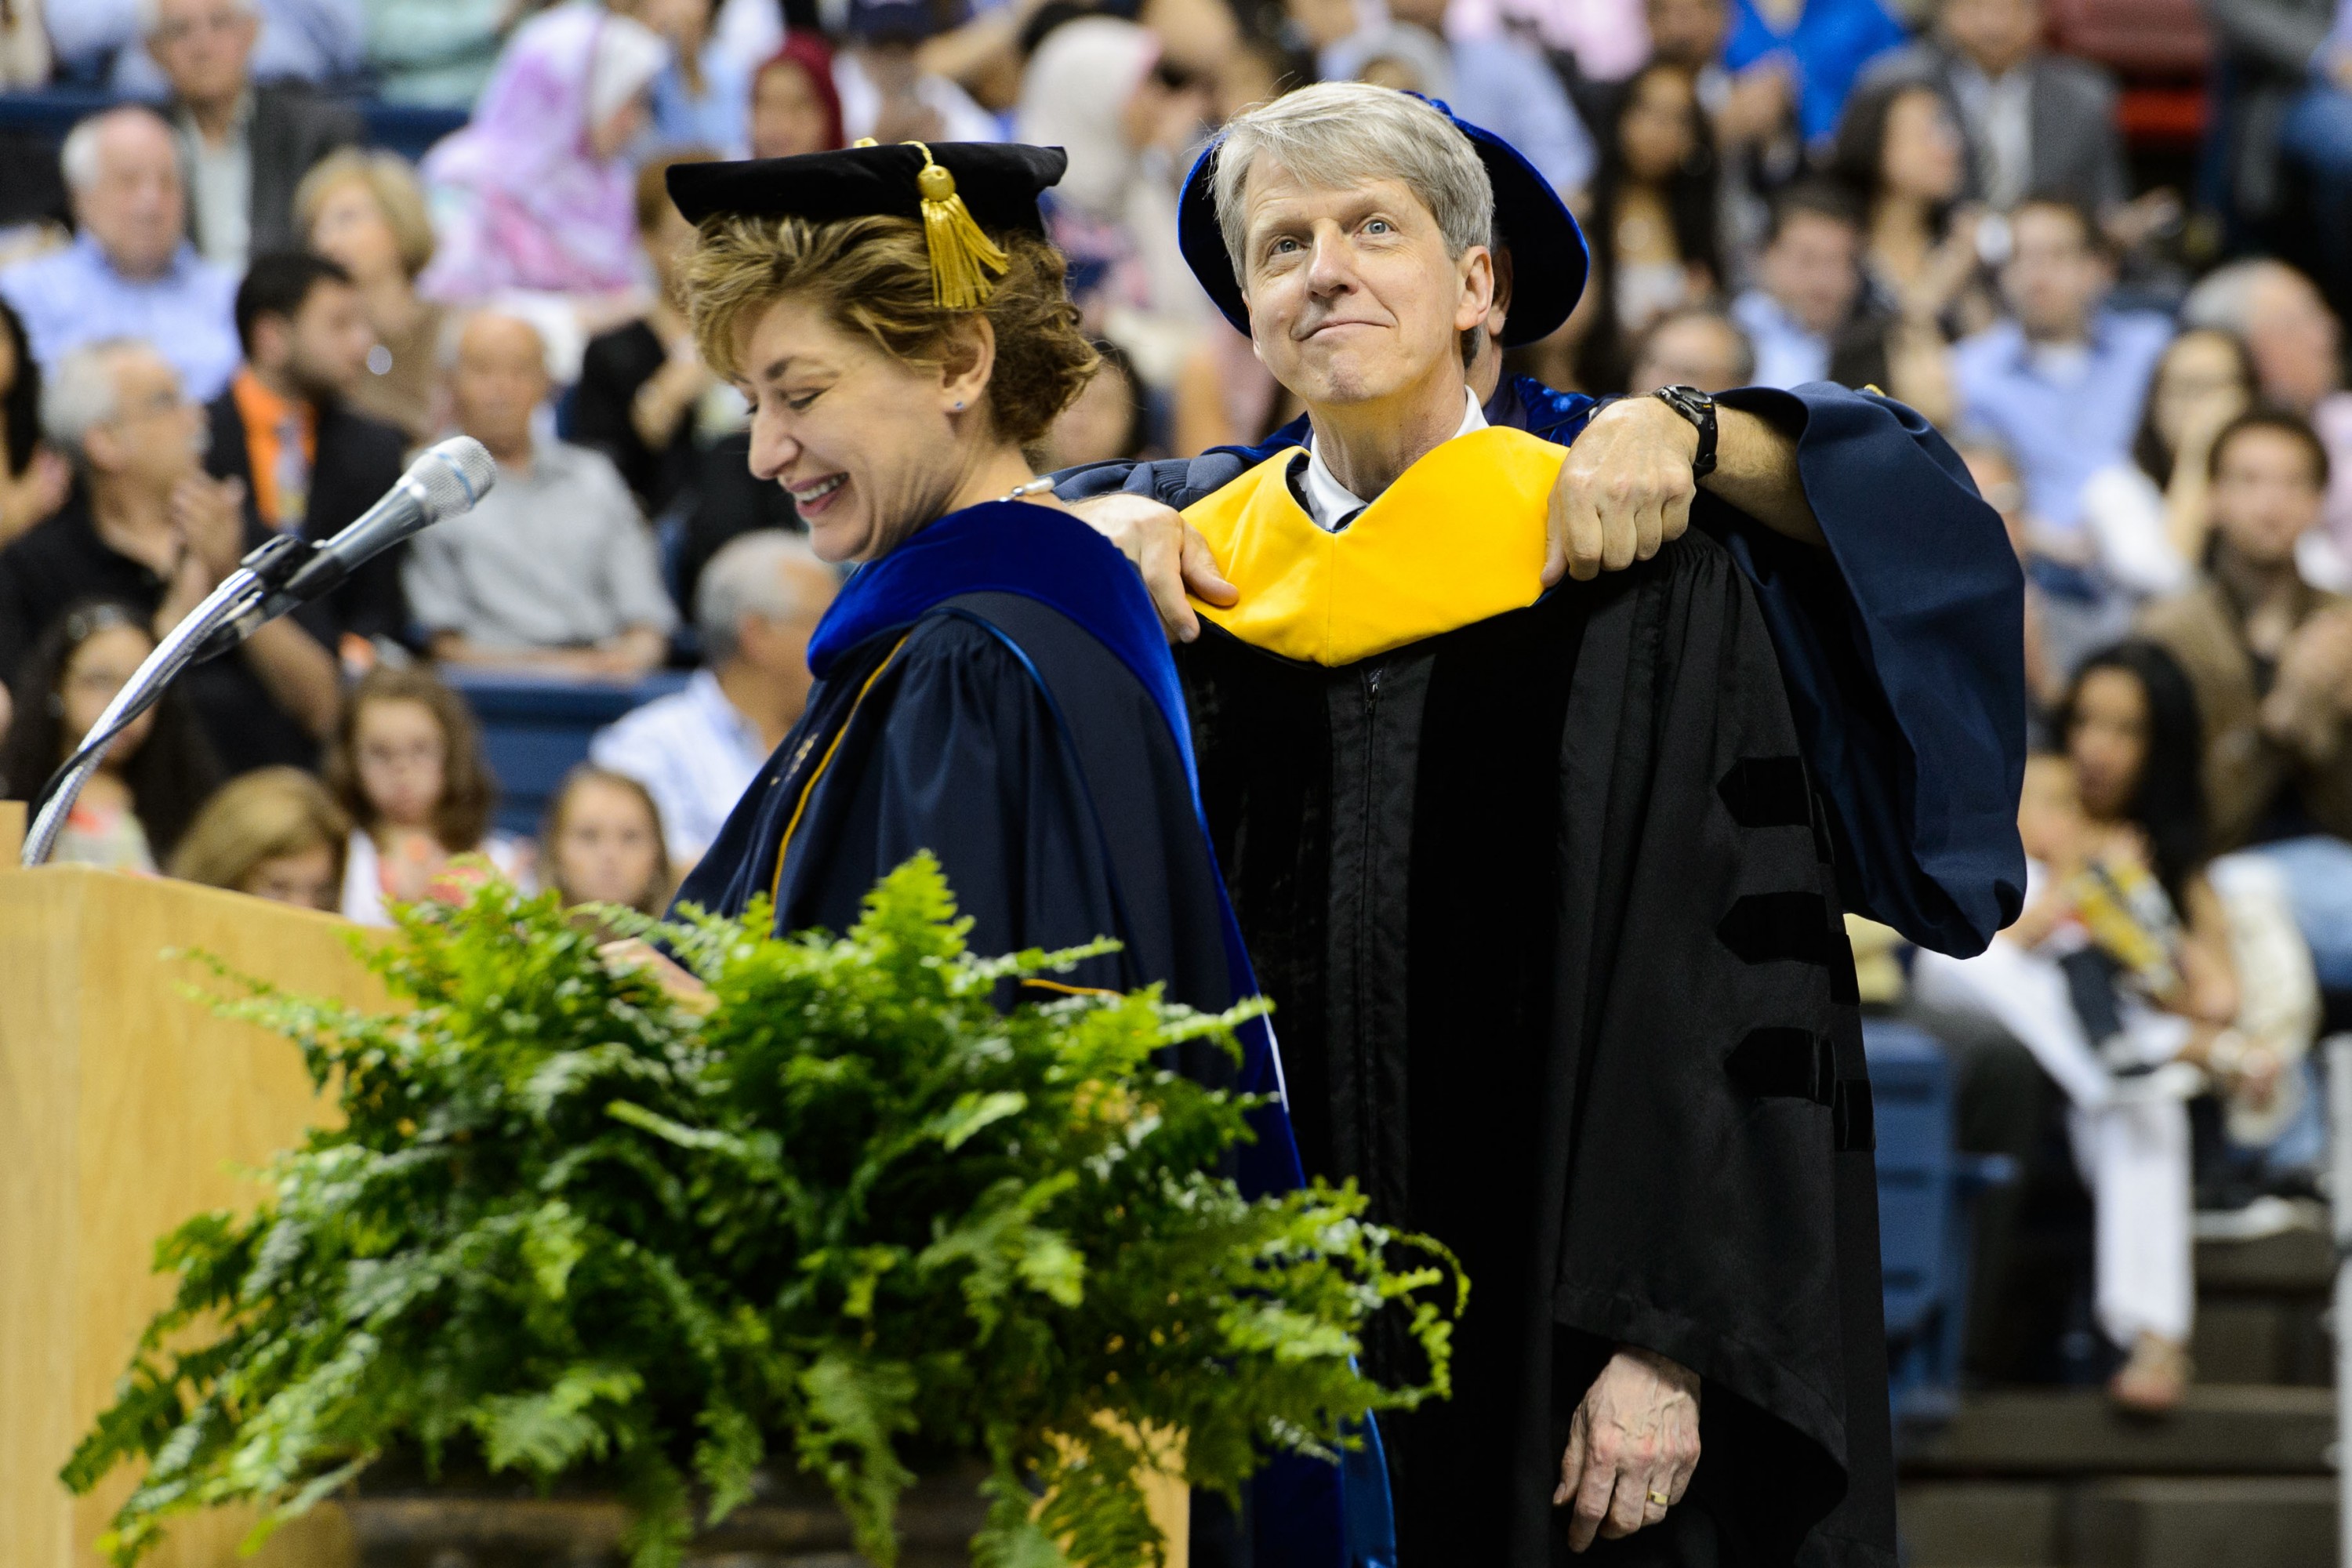 President Susan Herbst reads the citation to award Robert J. Schiller an honorary degree during the School of Business Commencement ceremony at Gampel Pavilion on May 10, 2015. (Peter Morenus/UConn Photo)